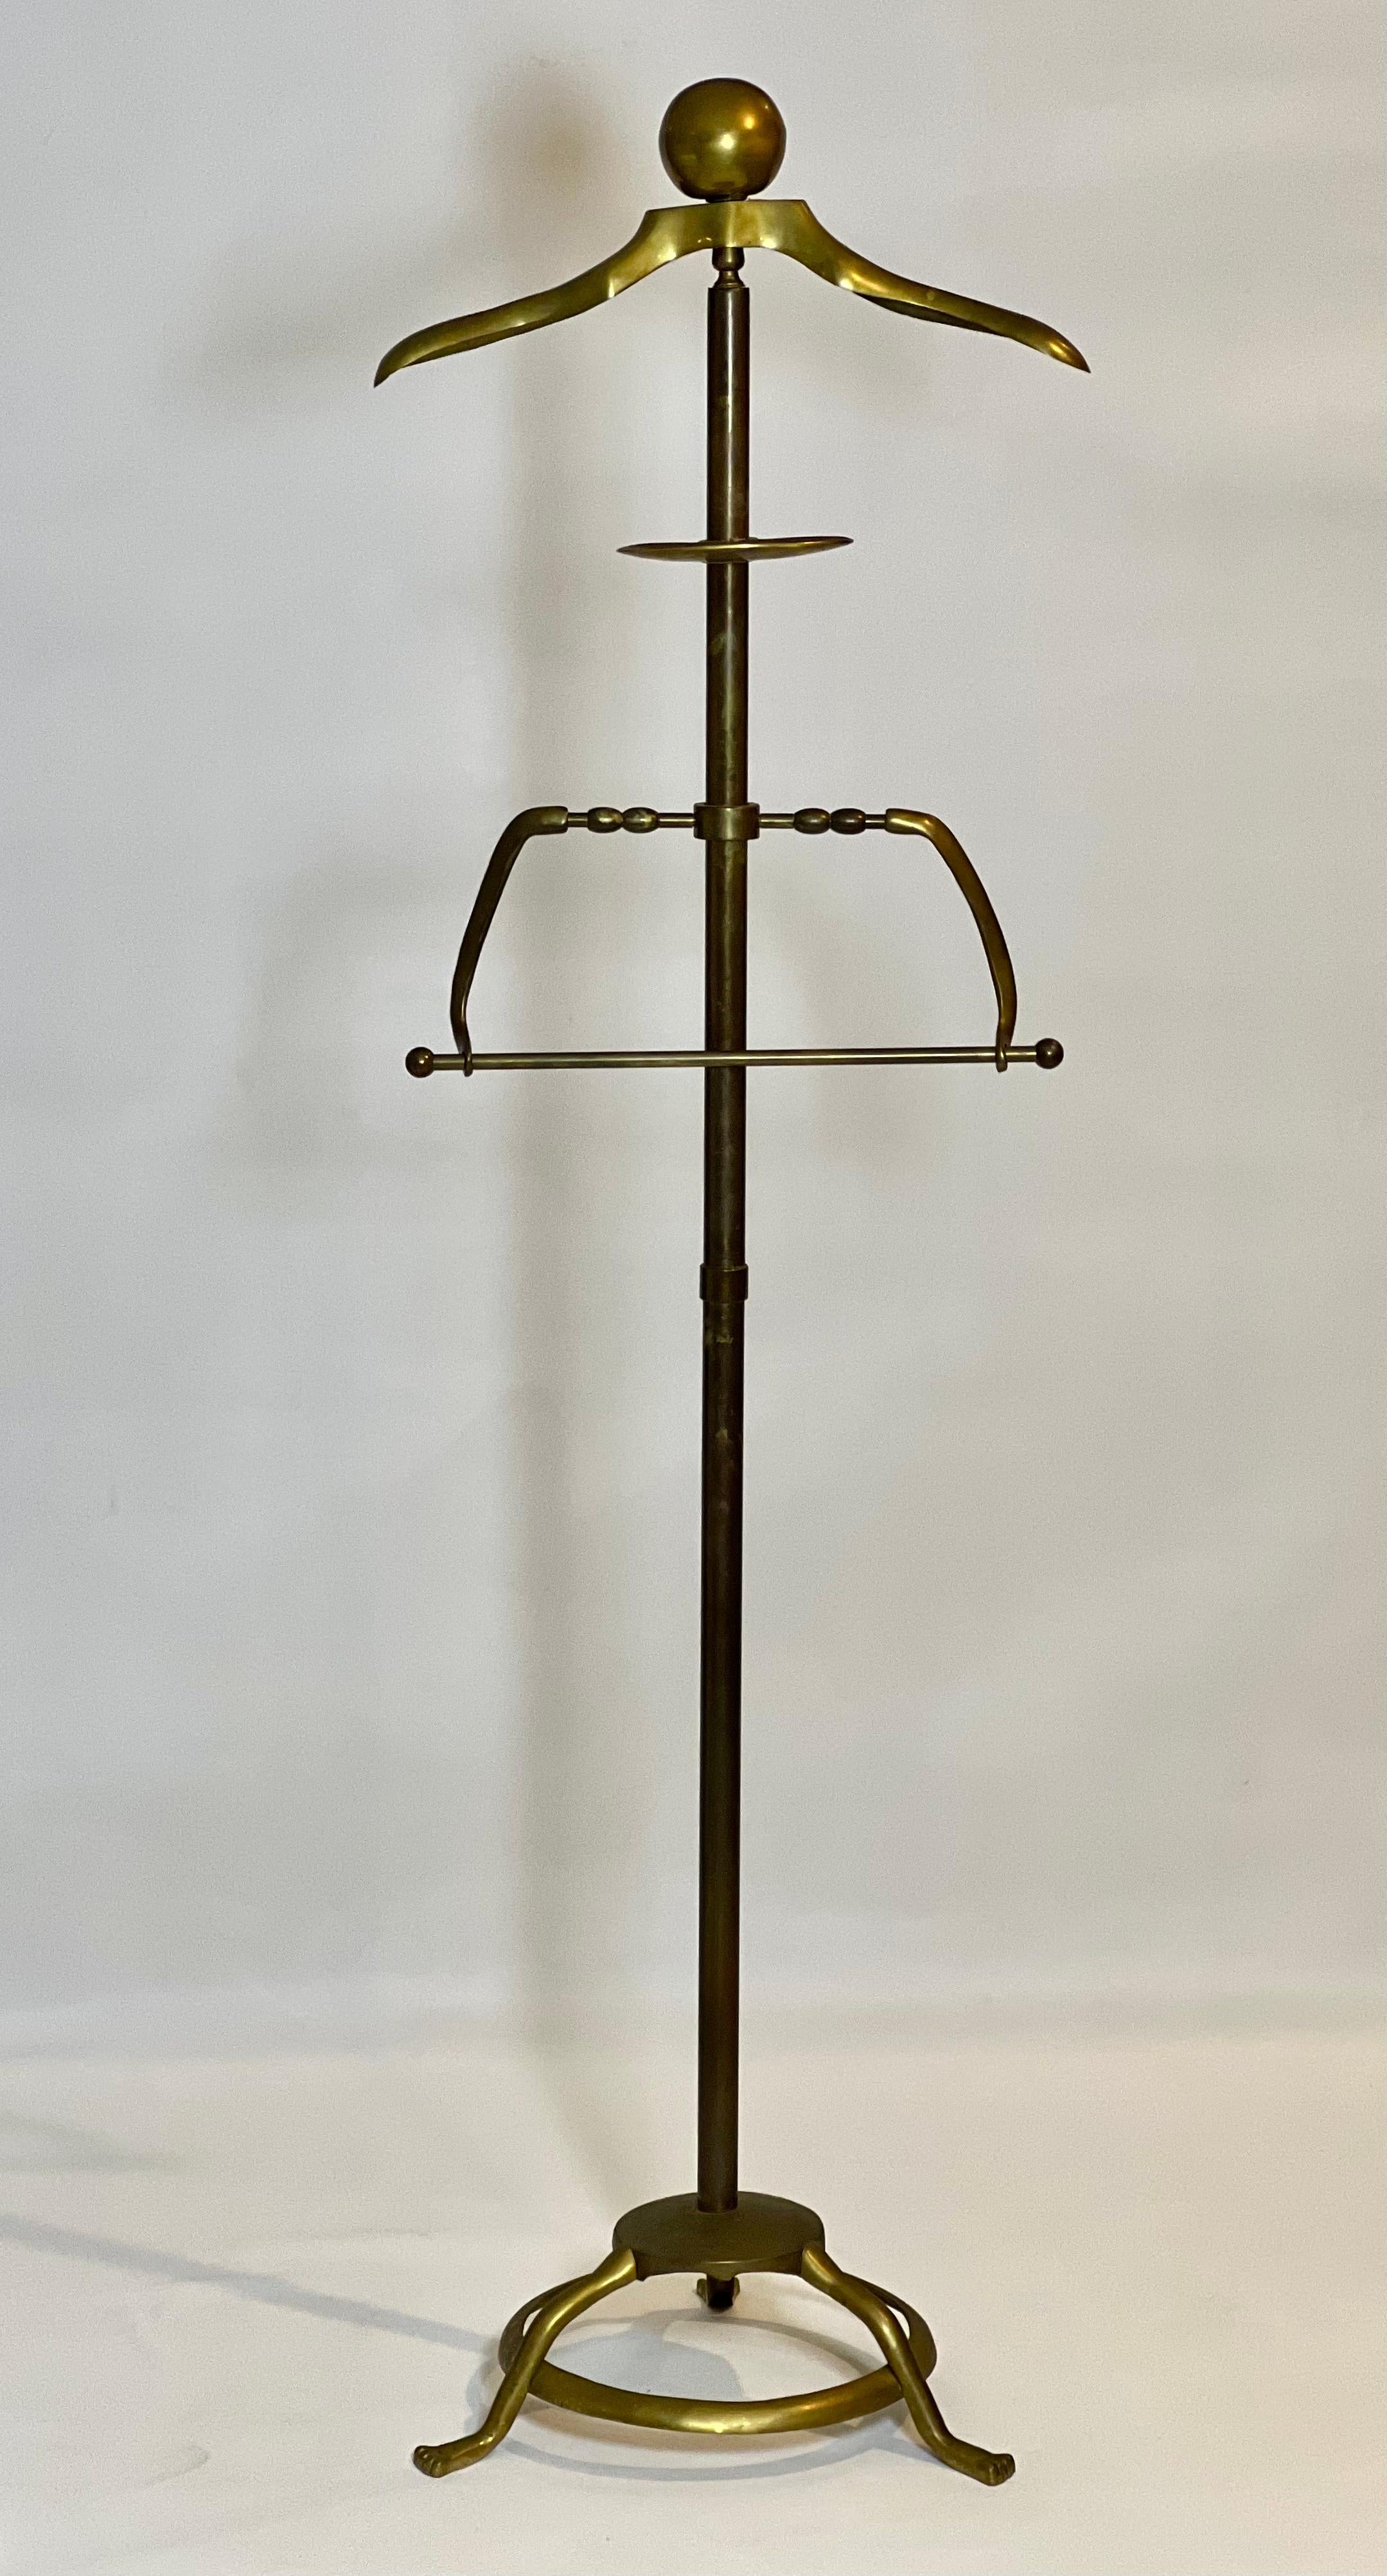 Art Deco solid brass valet stand, c. 1960s.

Elegant valet stand with pant hanger, small tray for accessories and contoured shoulder form hanger.   It features three stylized feet on a circular base and a large ball finial.  The pant hanger can